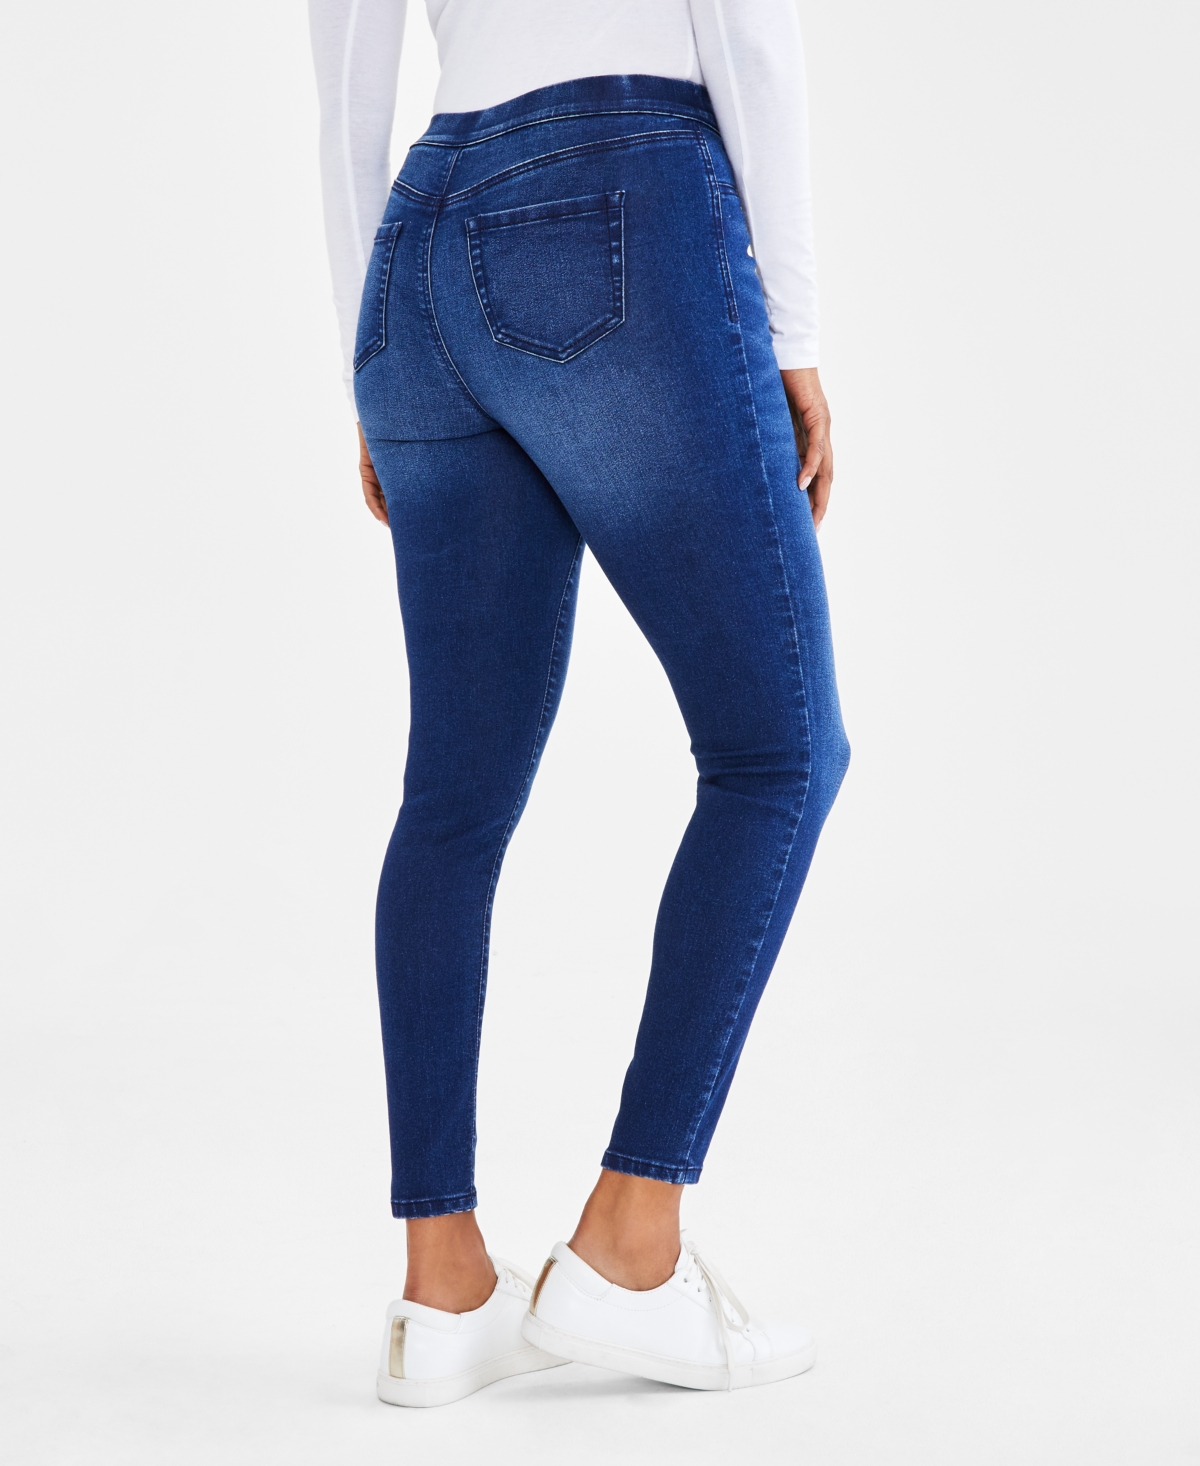 Style & Co Women's Whiskered Mid-Rise Pull-On Jeggings, Created for Macy's  - Ashby